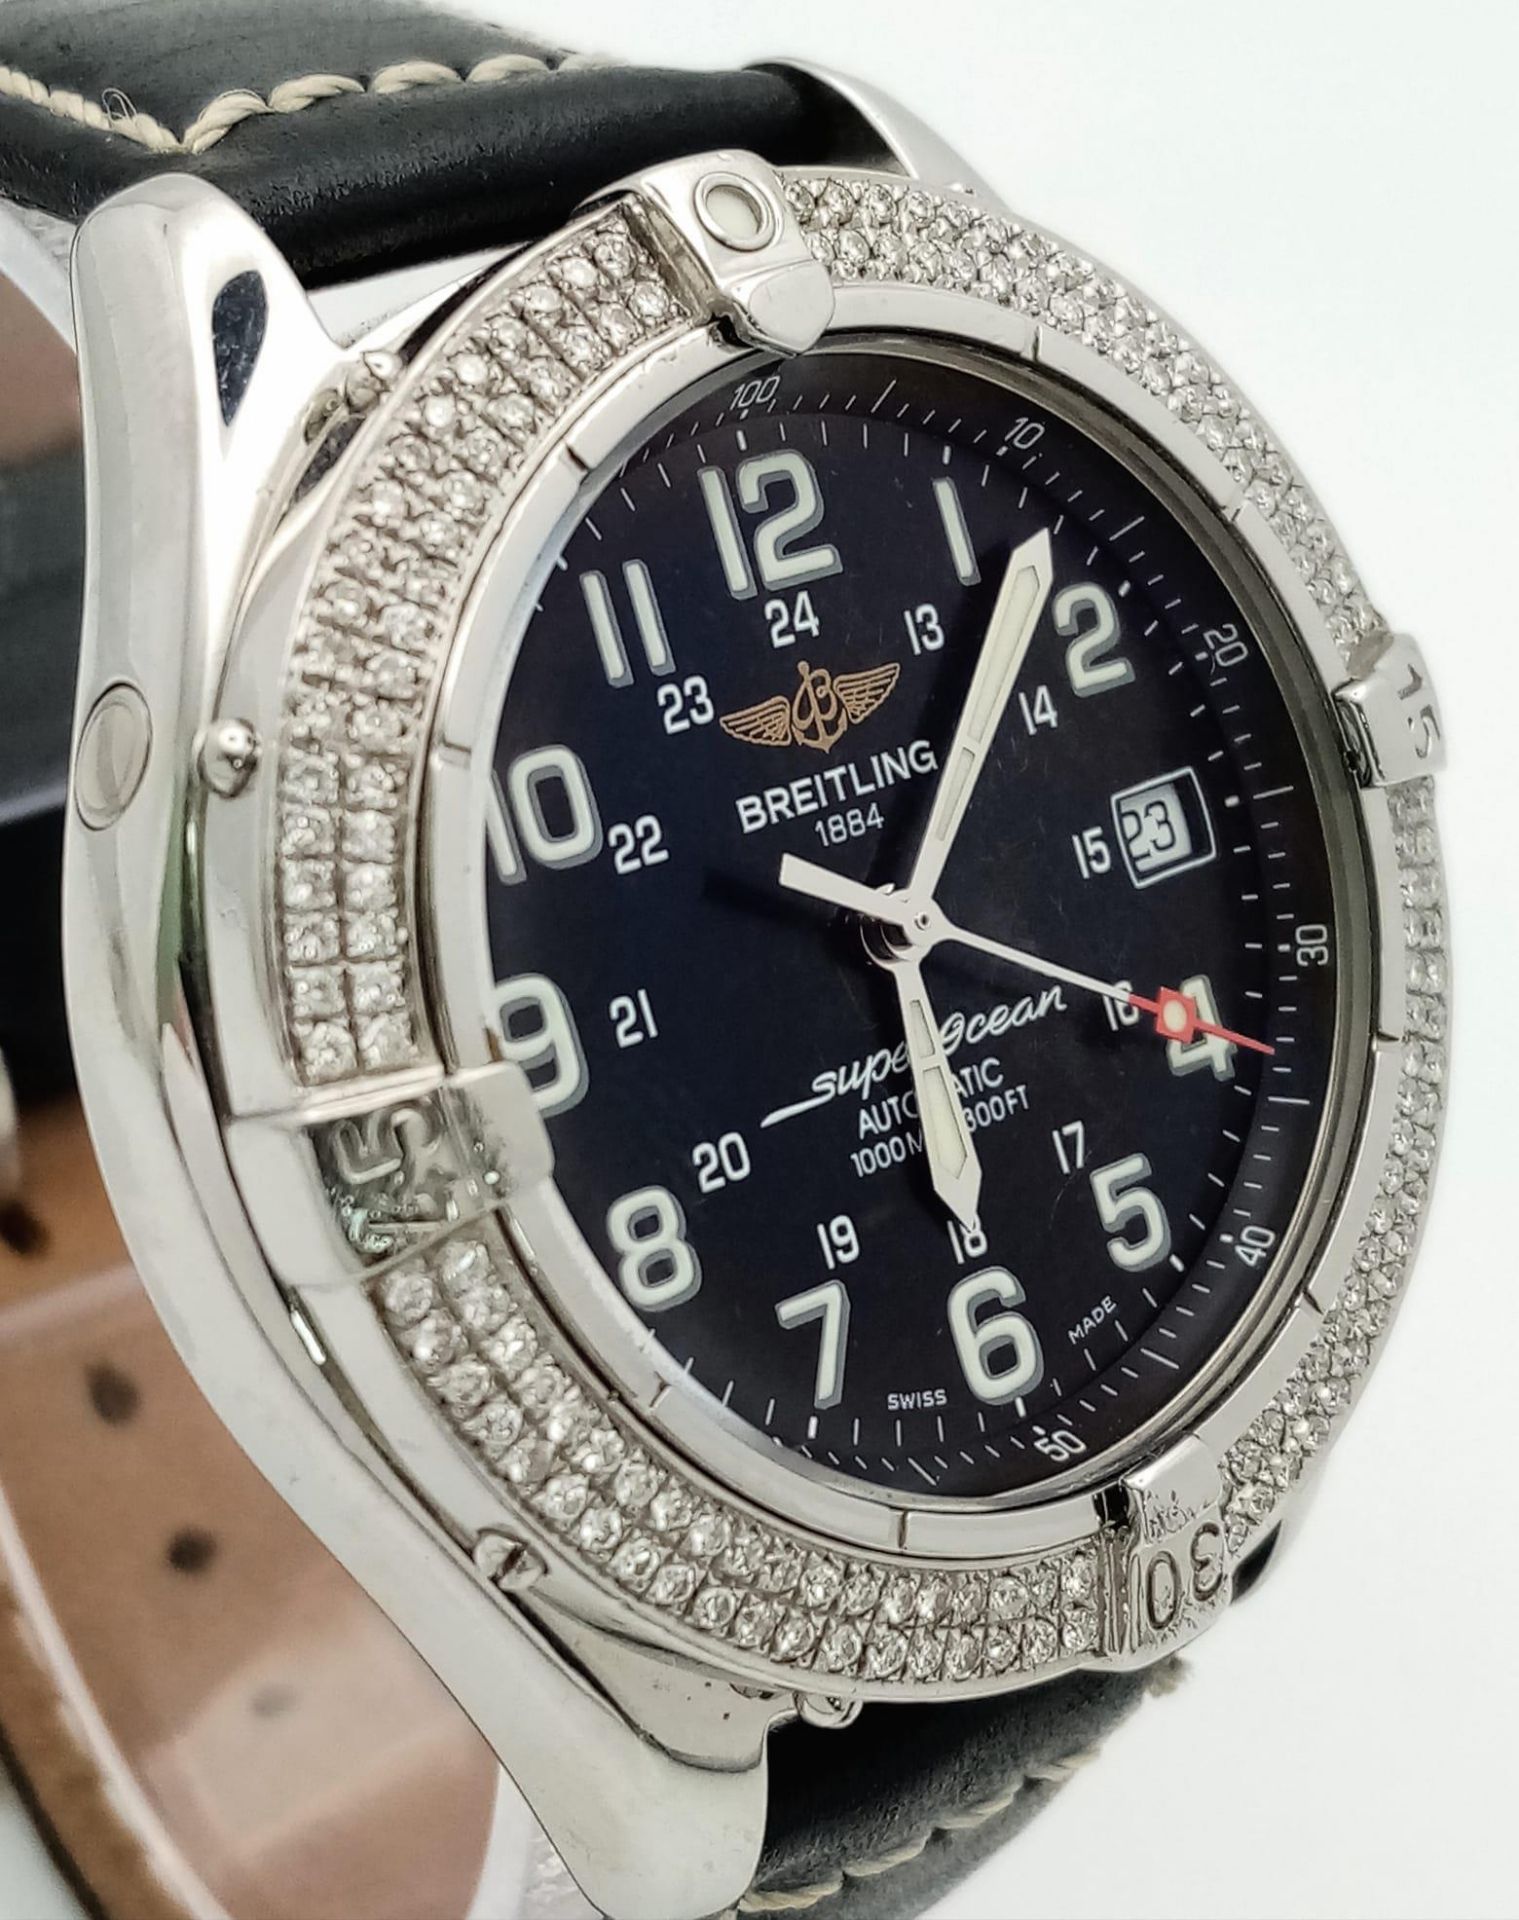 A Breitling SuperOcean Automatic Diamond Gents Watch. Black leather strap. Stainless steel and - Image 5 of 13